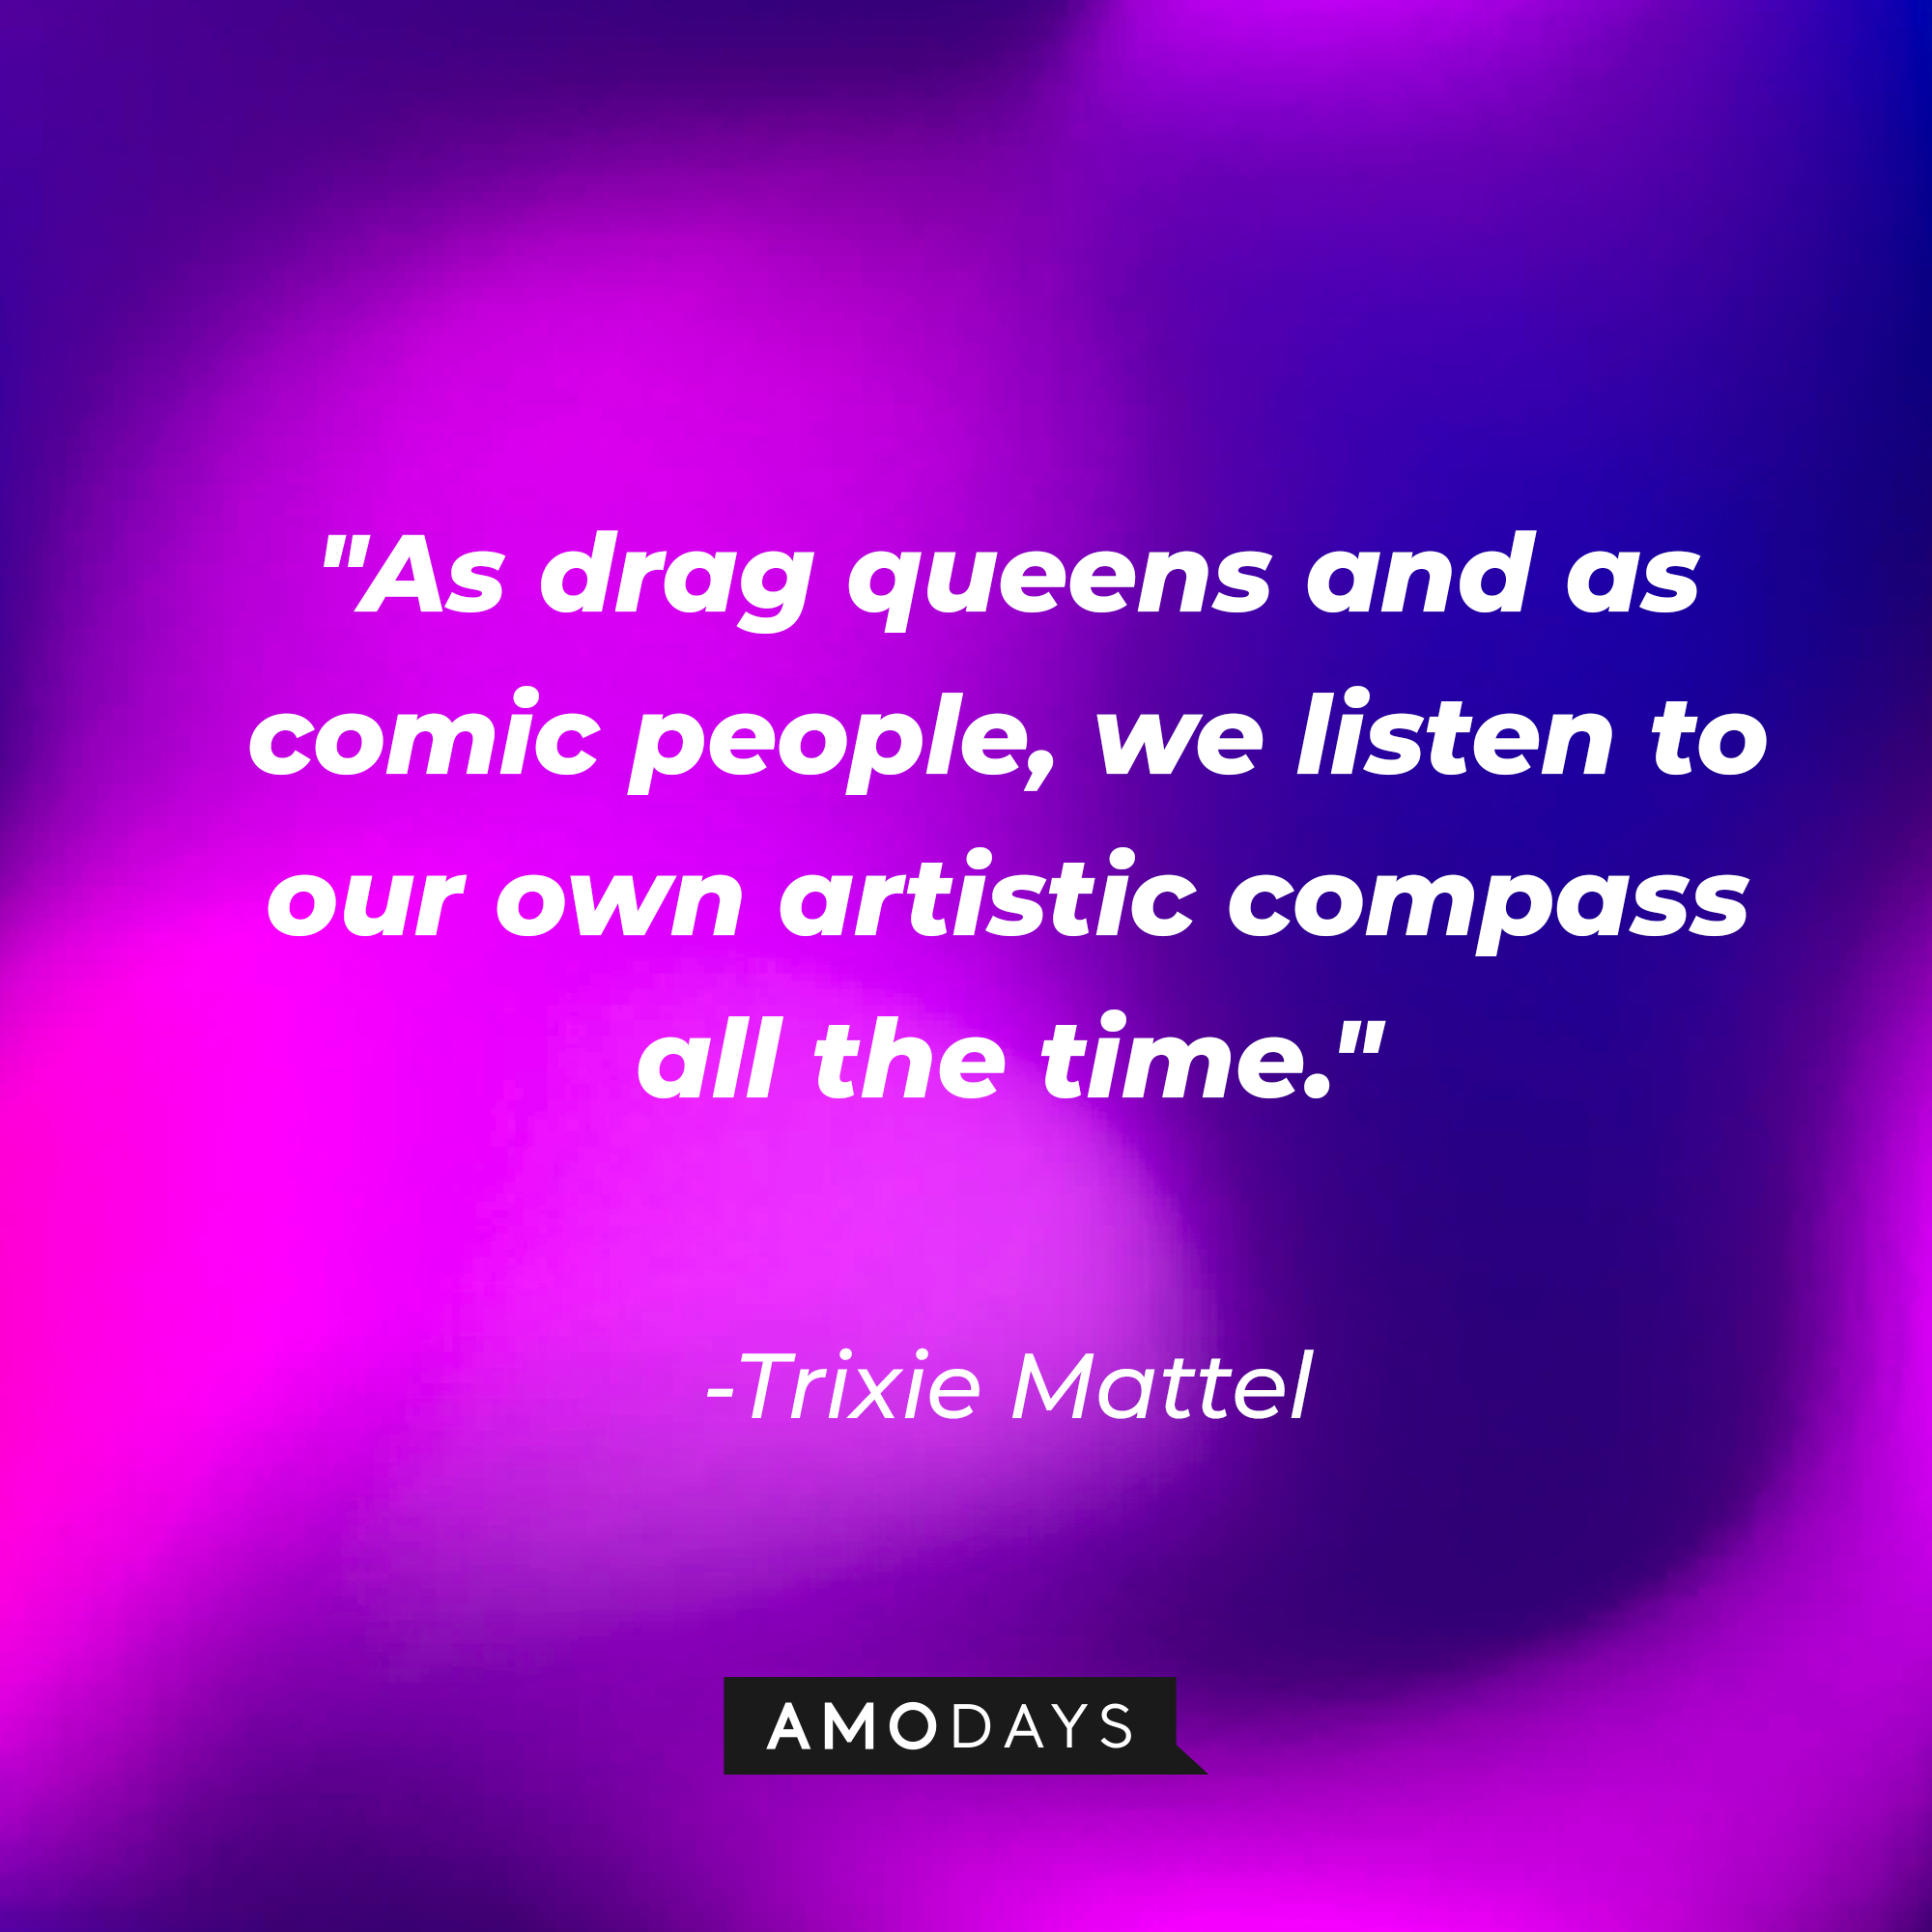 Trixie Mattel's quote: "As drag queens and as comic people, we listen to our own artistic compass all the time." | Source: AmoDays